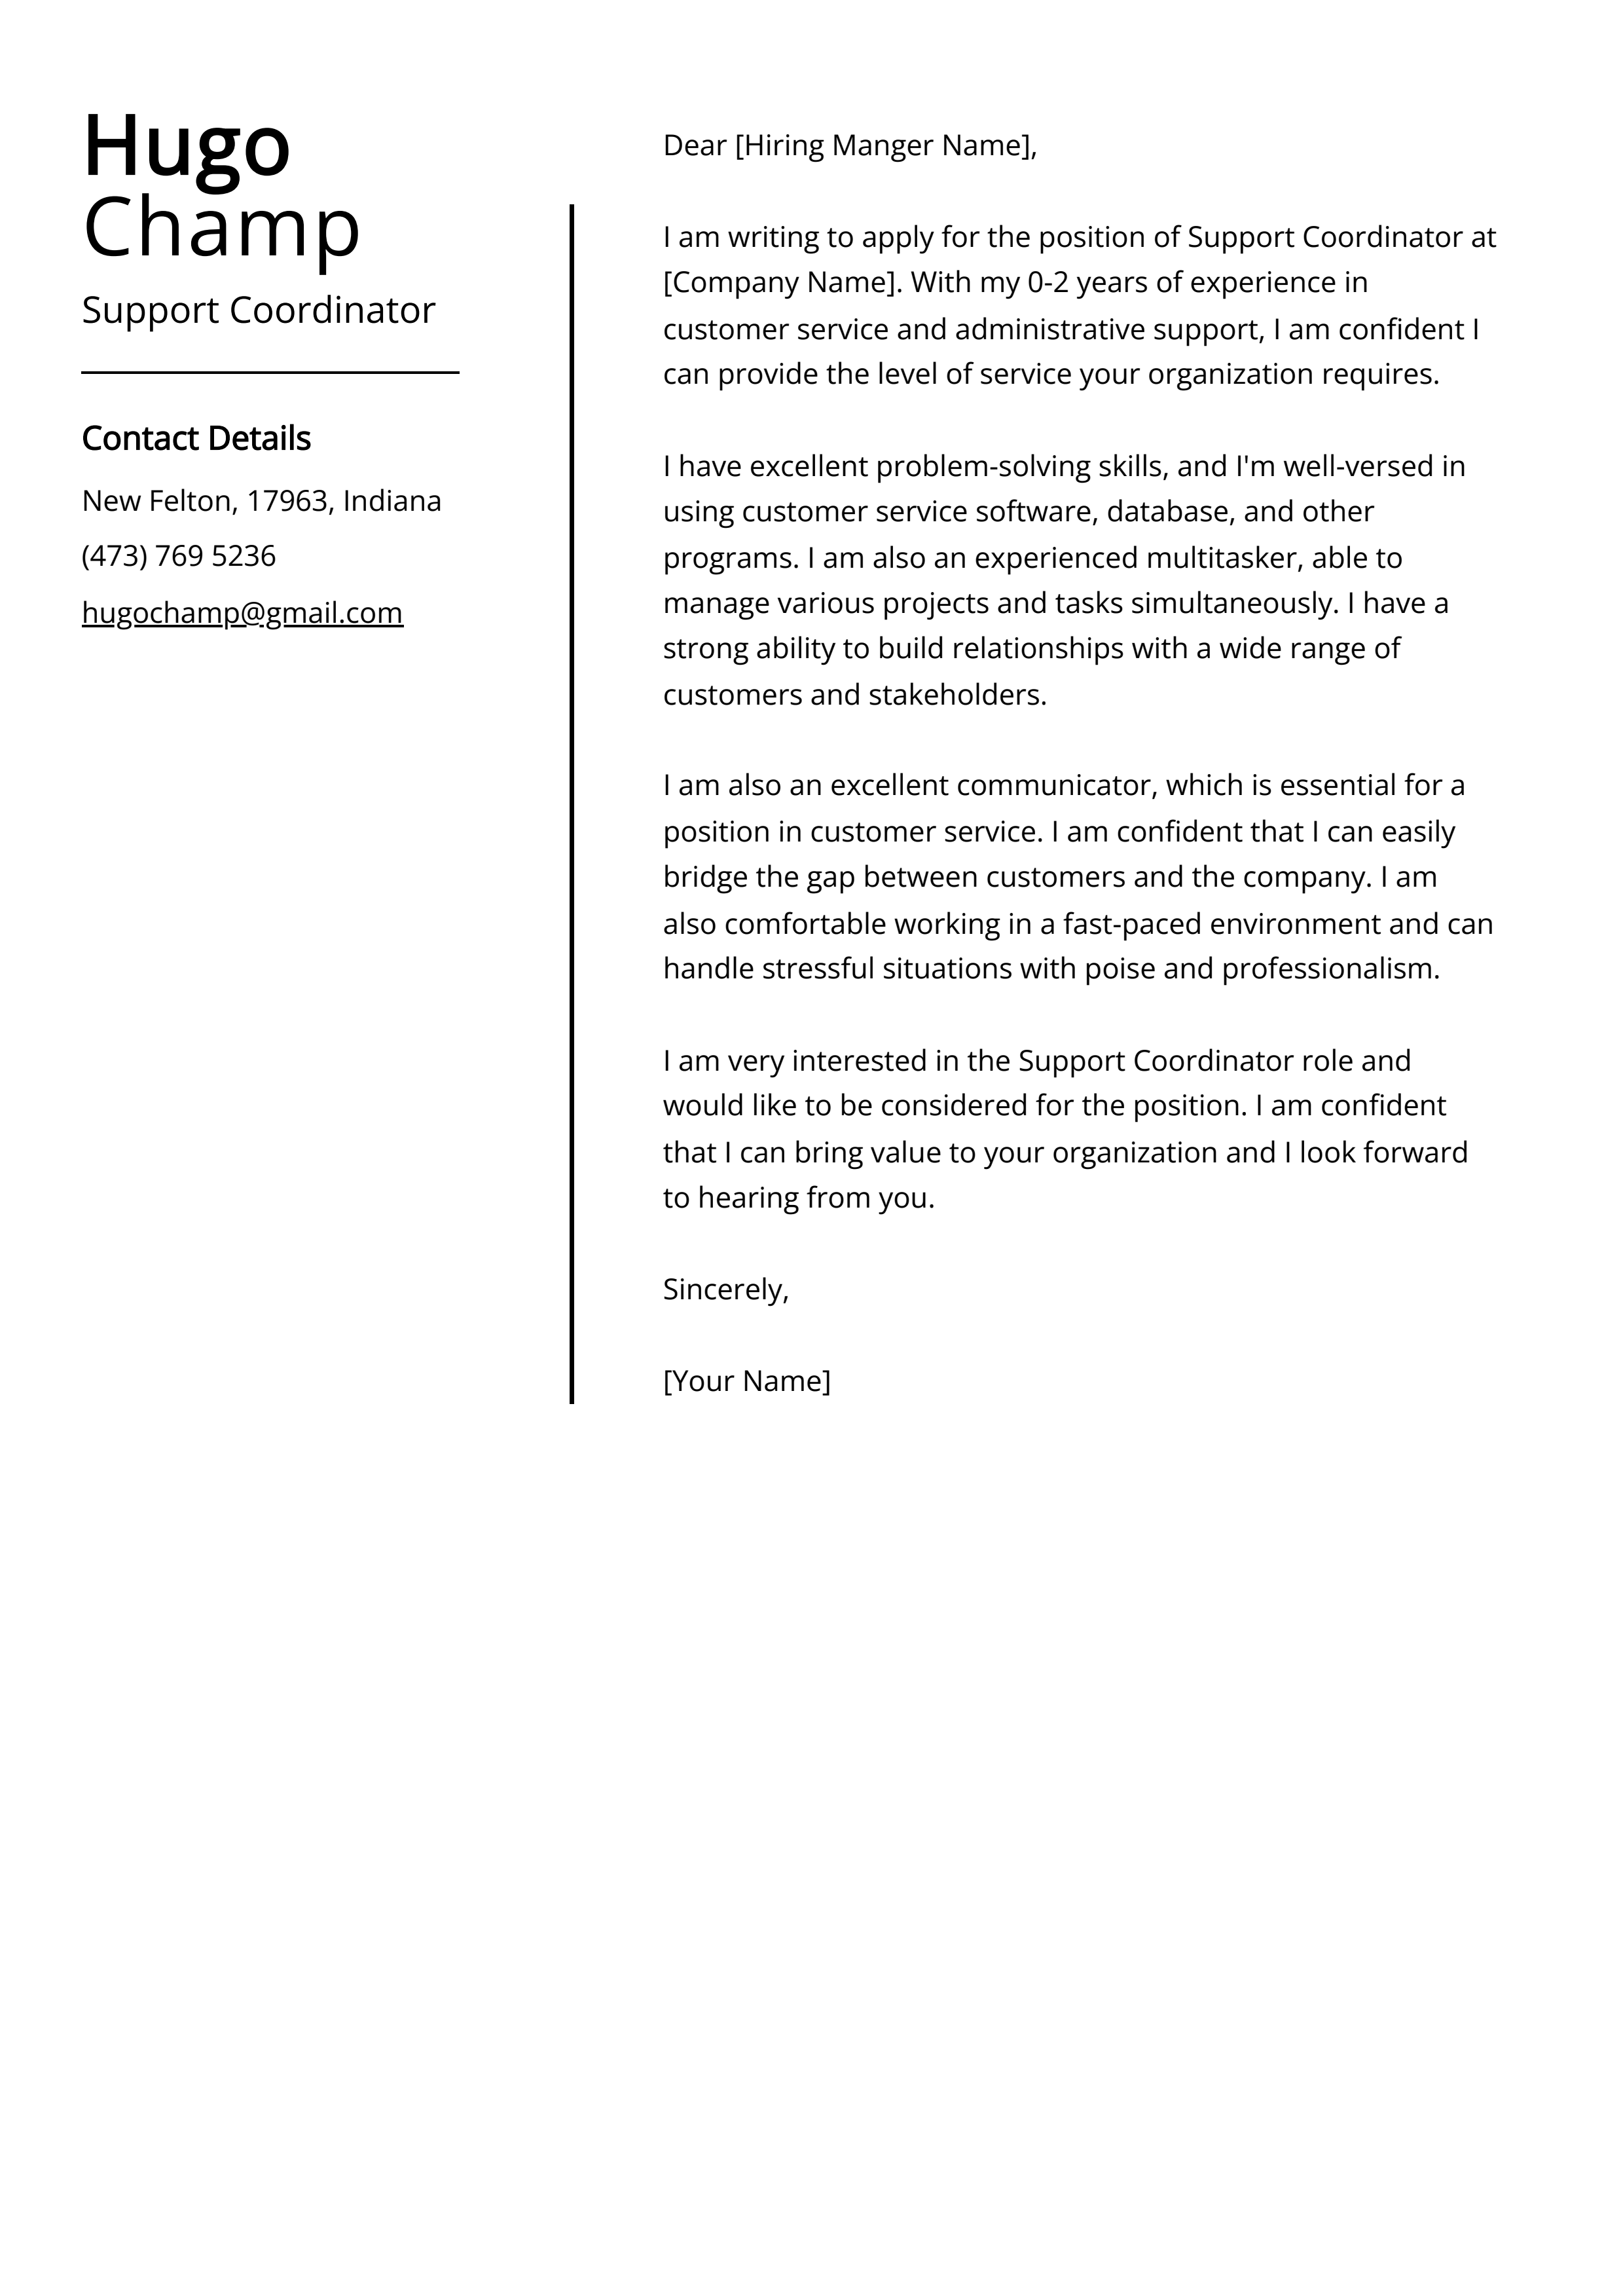 Support Coordinator Cover Letter Example